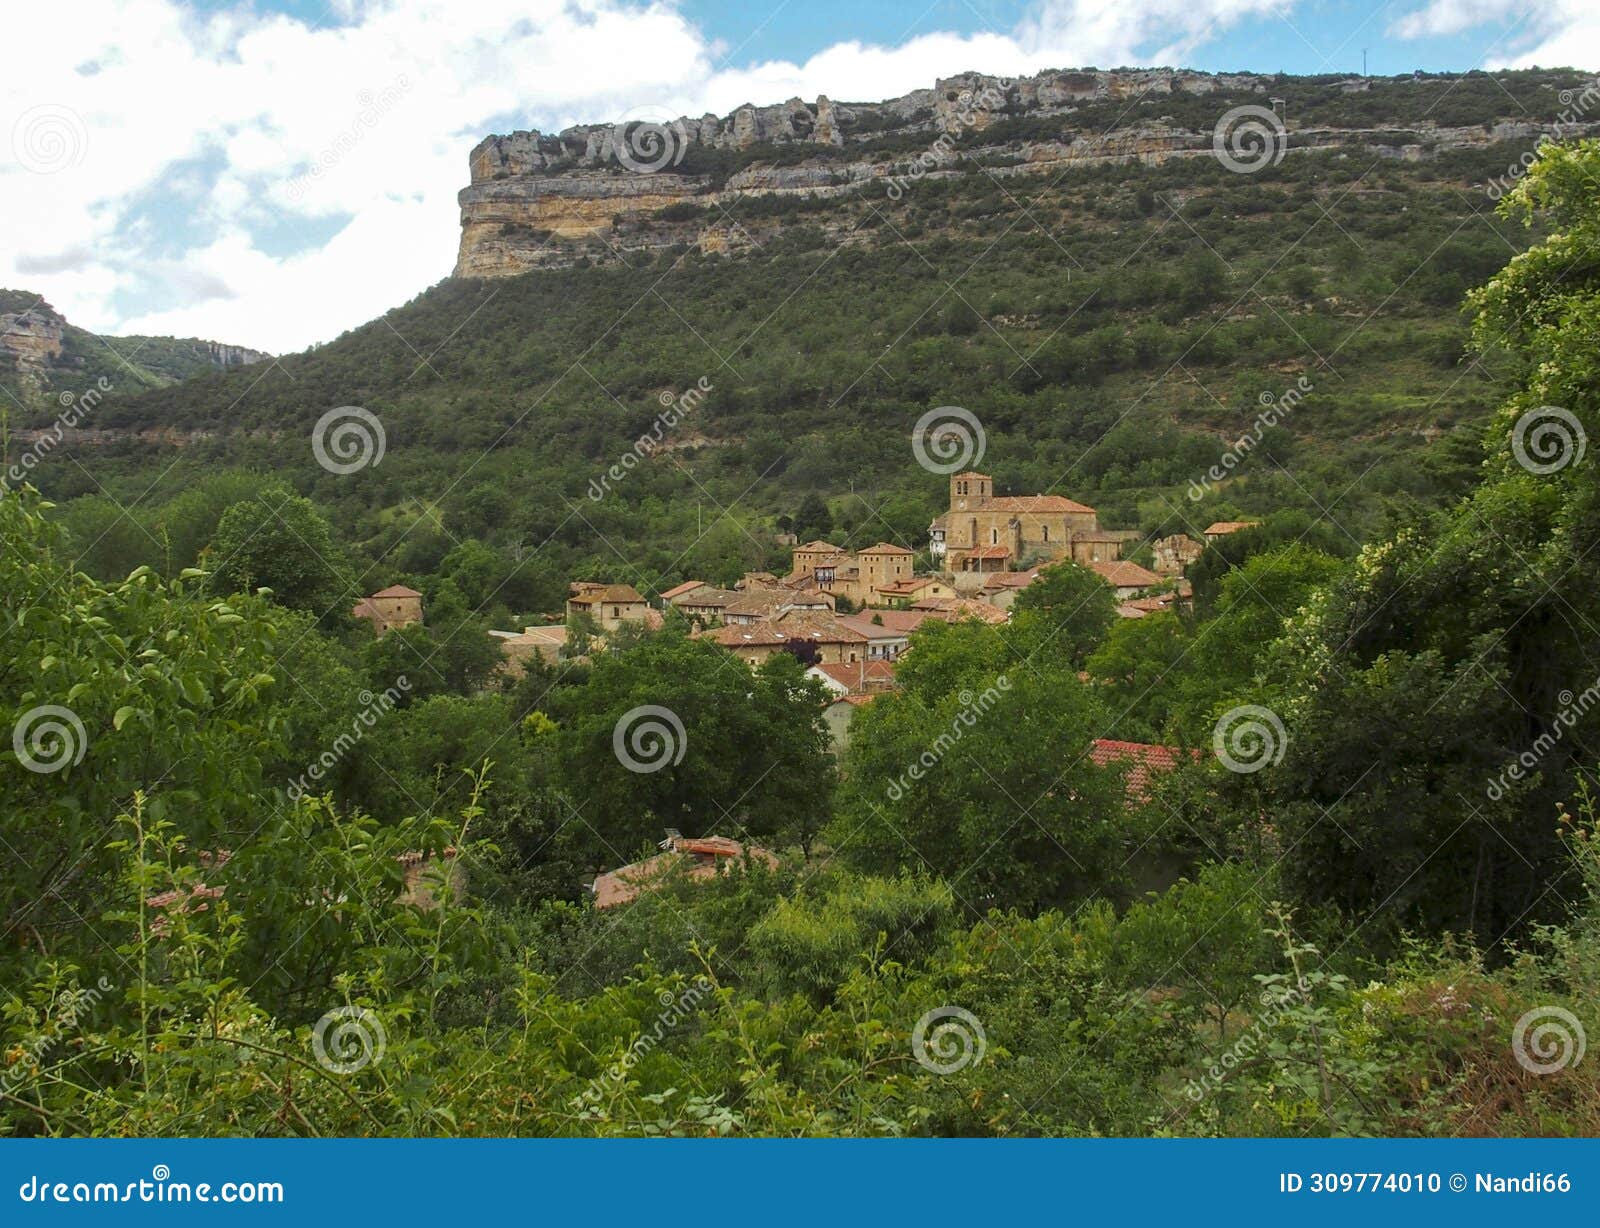 view of the town of escalada from the south. burgos, castile and leon, spain.